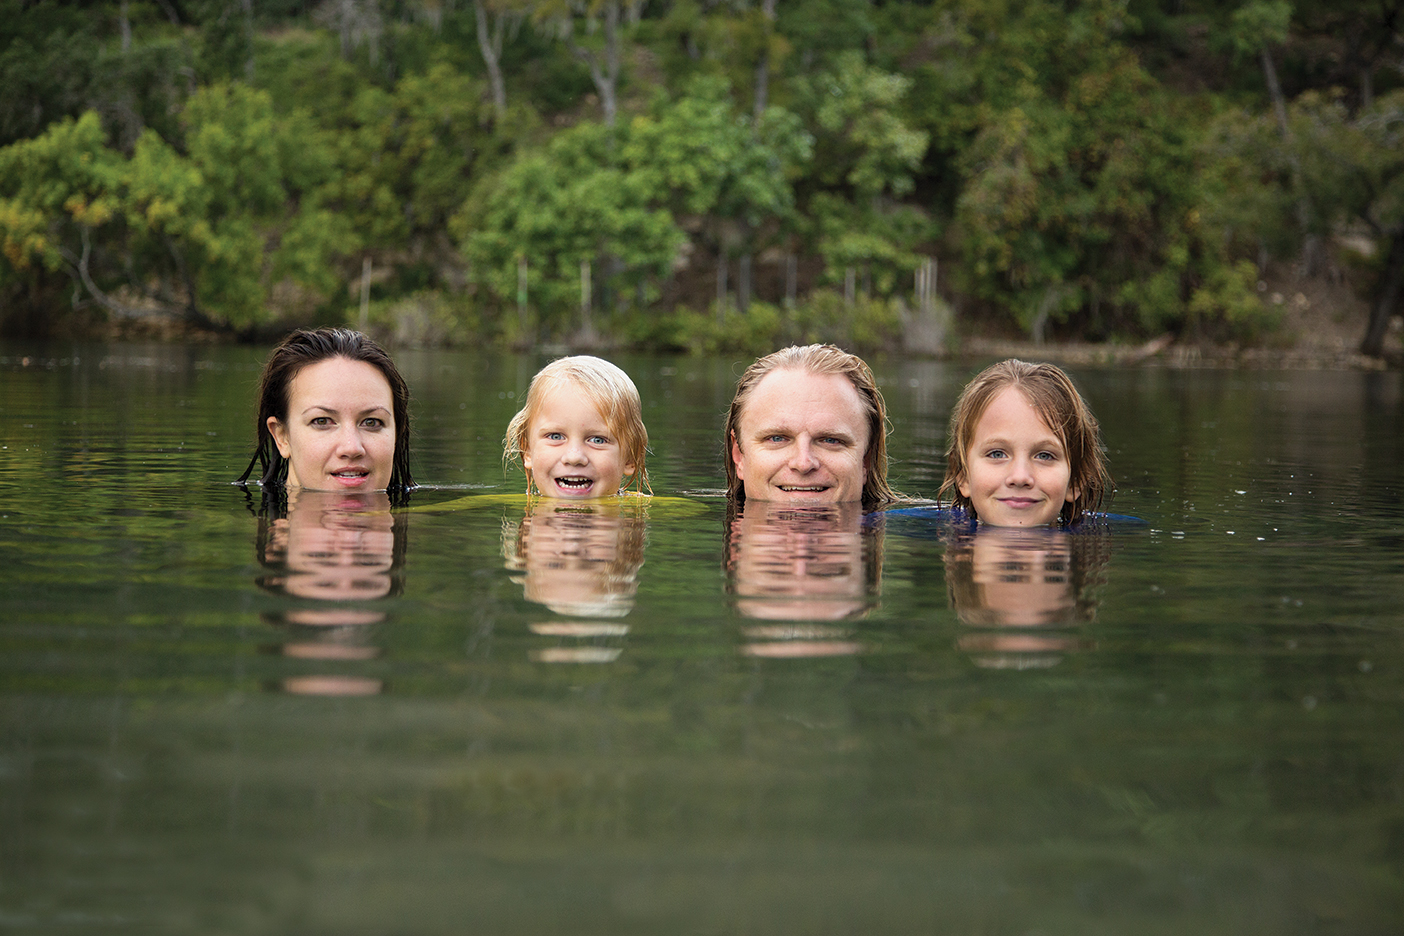 The Hanselman family, Lyndee, Fitz, Eagen, and Anders are floating in a lake with their heads poking out, smiling for a photo.